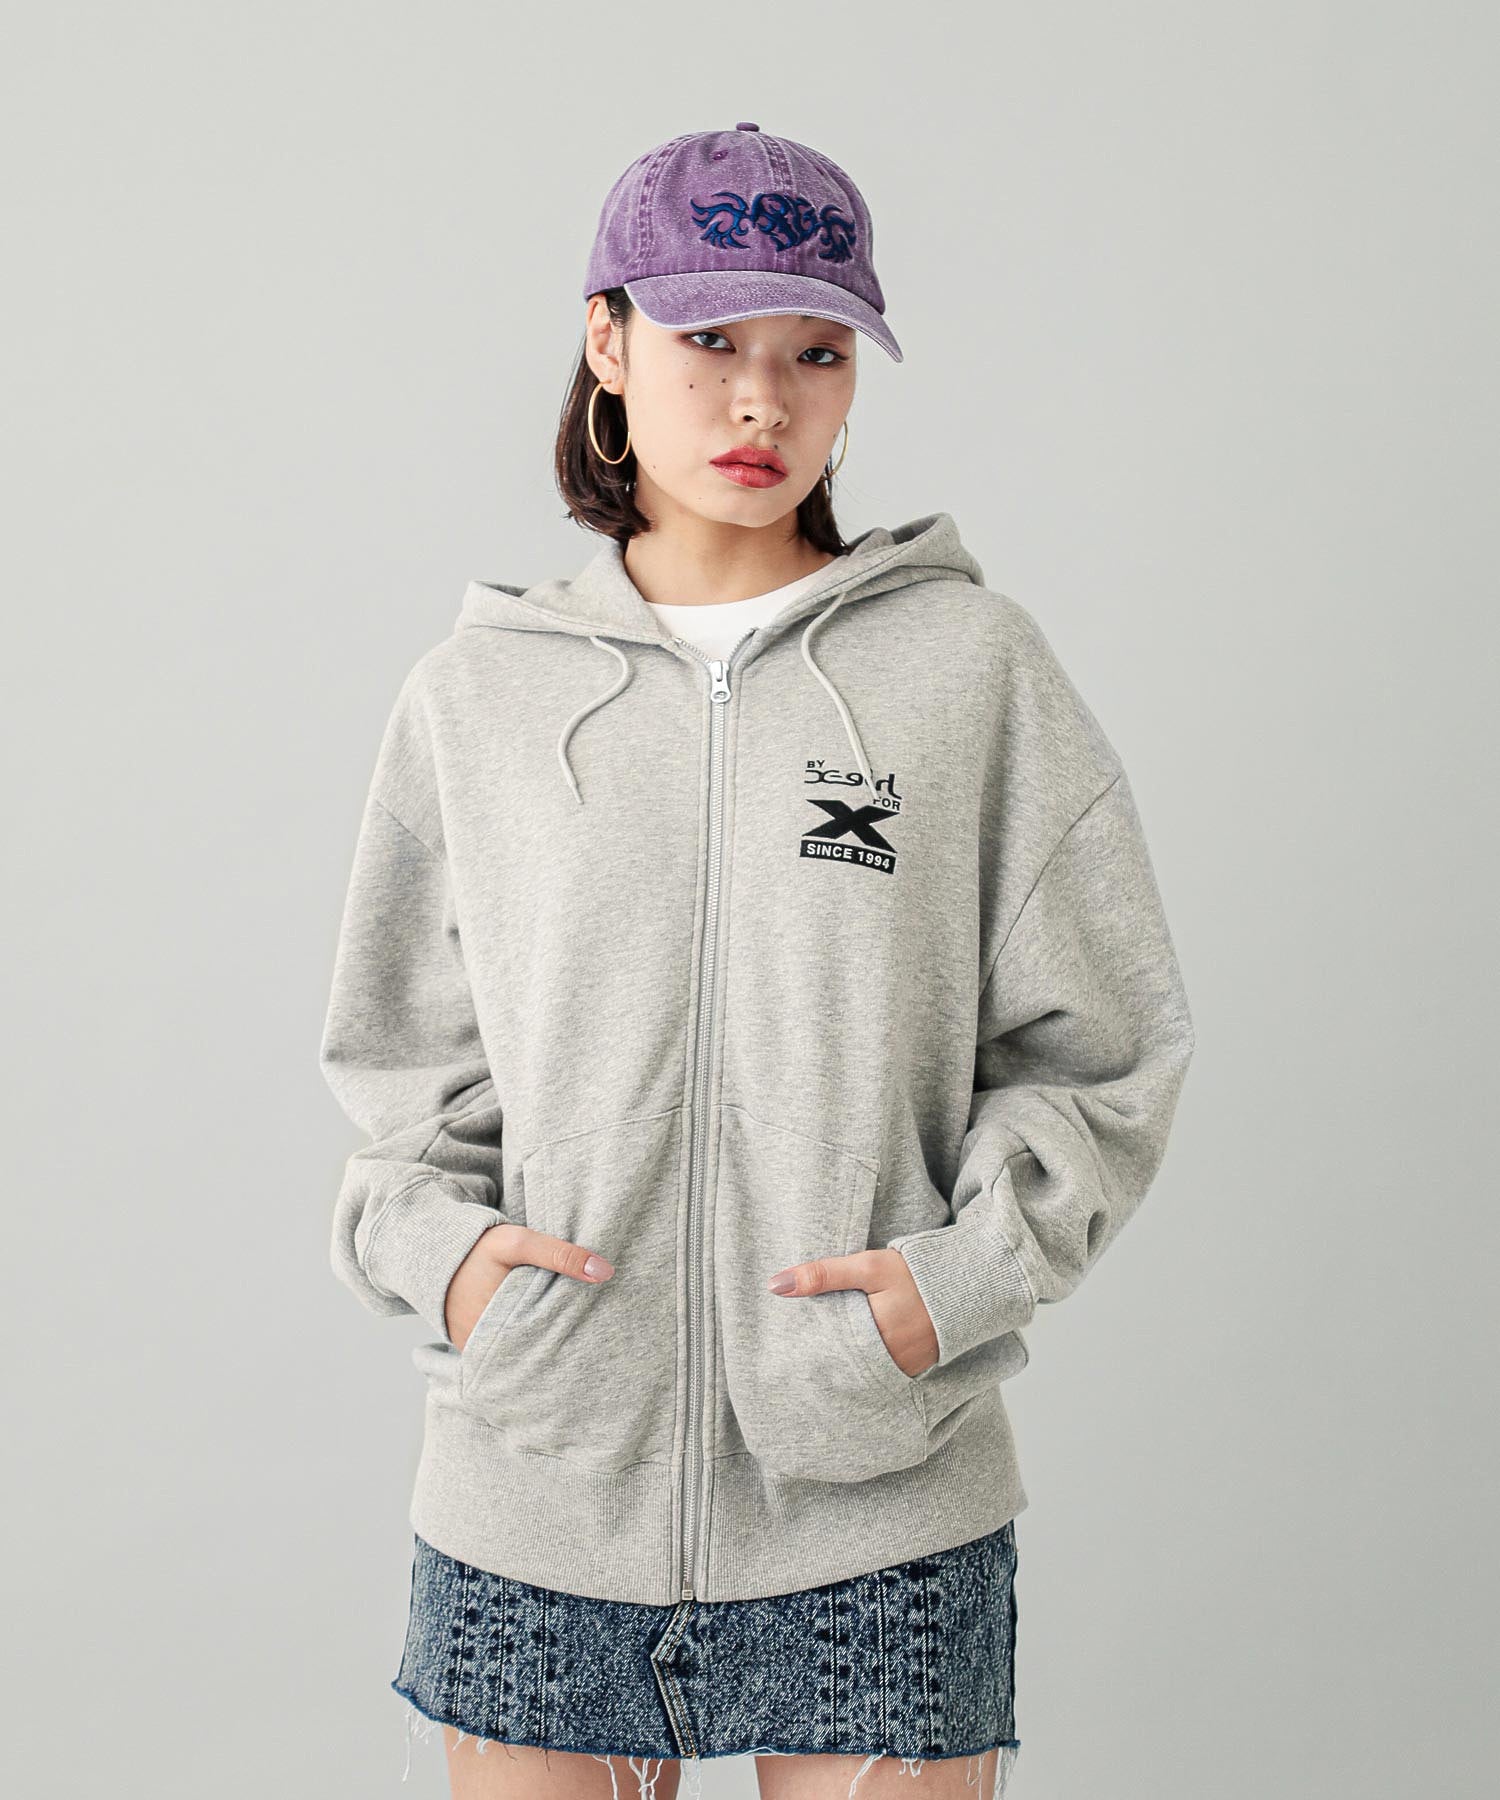 BY X-GIRL FOR X ZIP UP SWEAT HOODIE